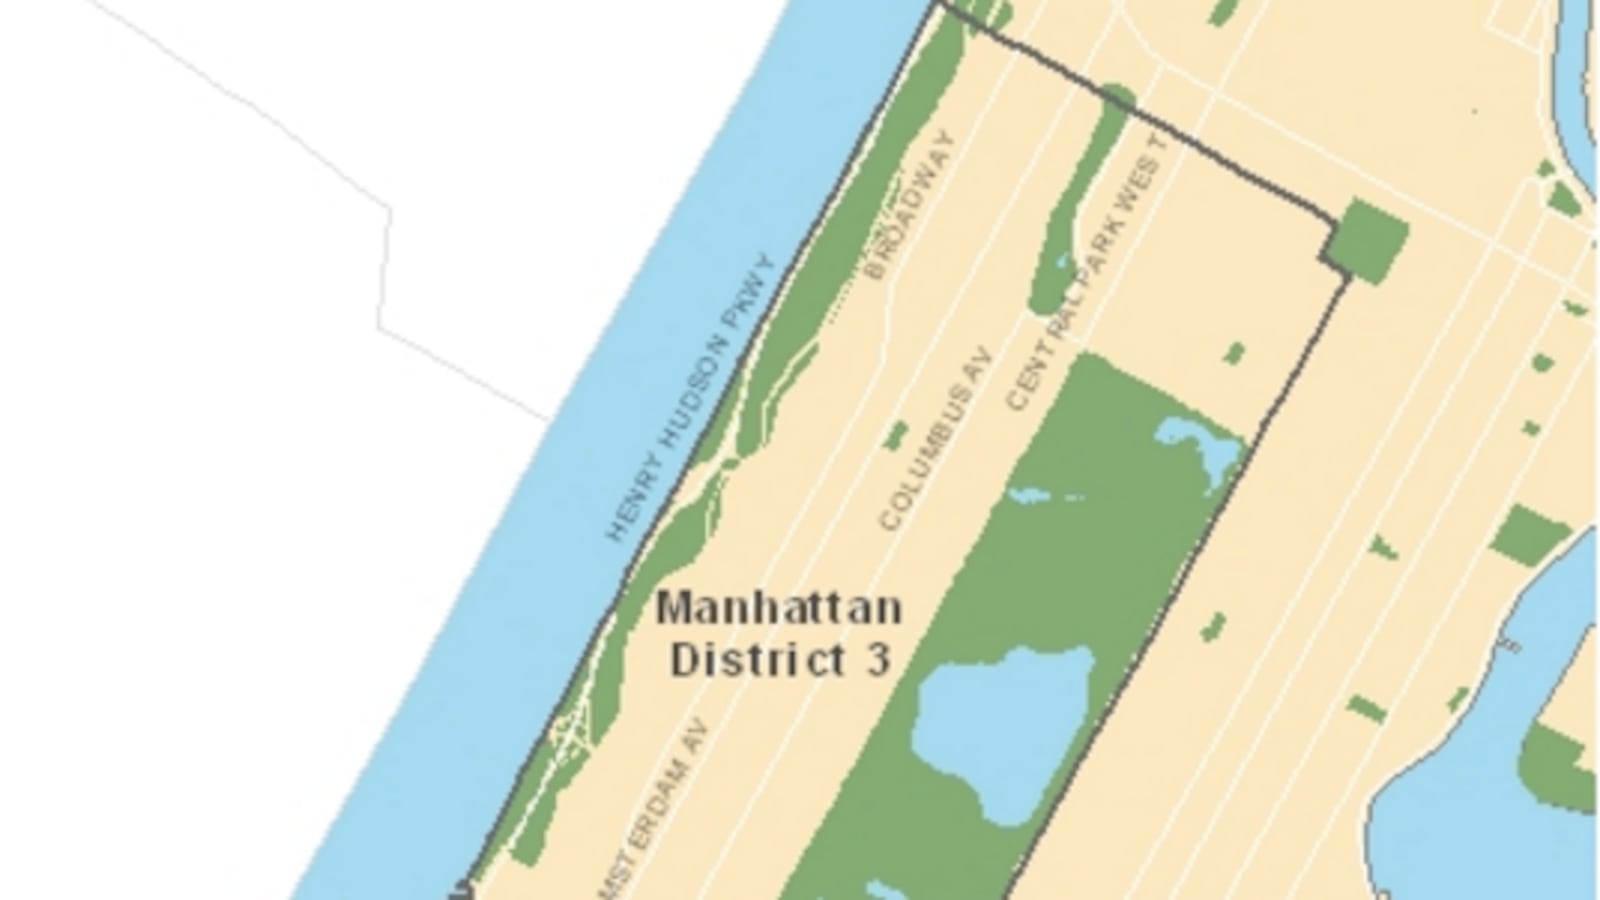 District 3 includes the Upper West Side and parts of Harlem.